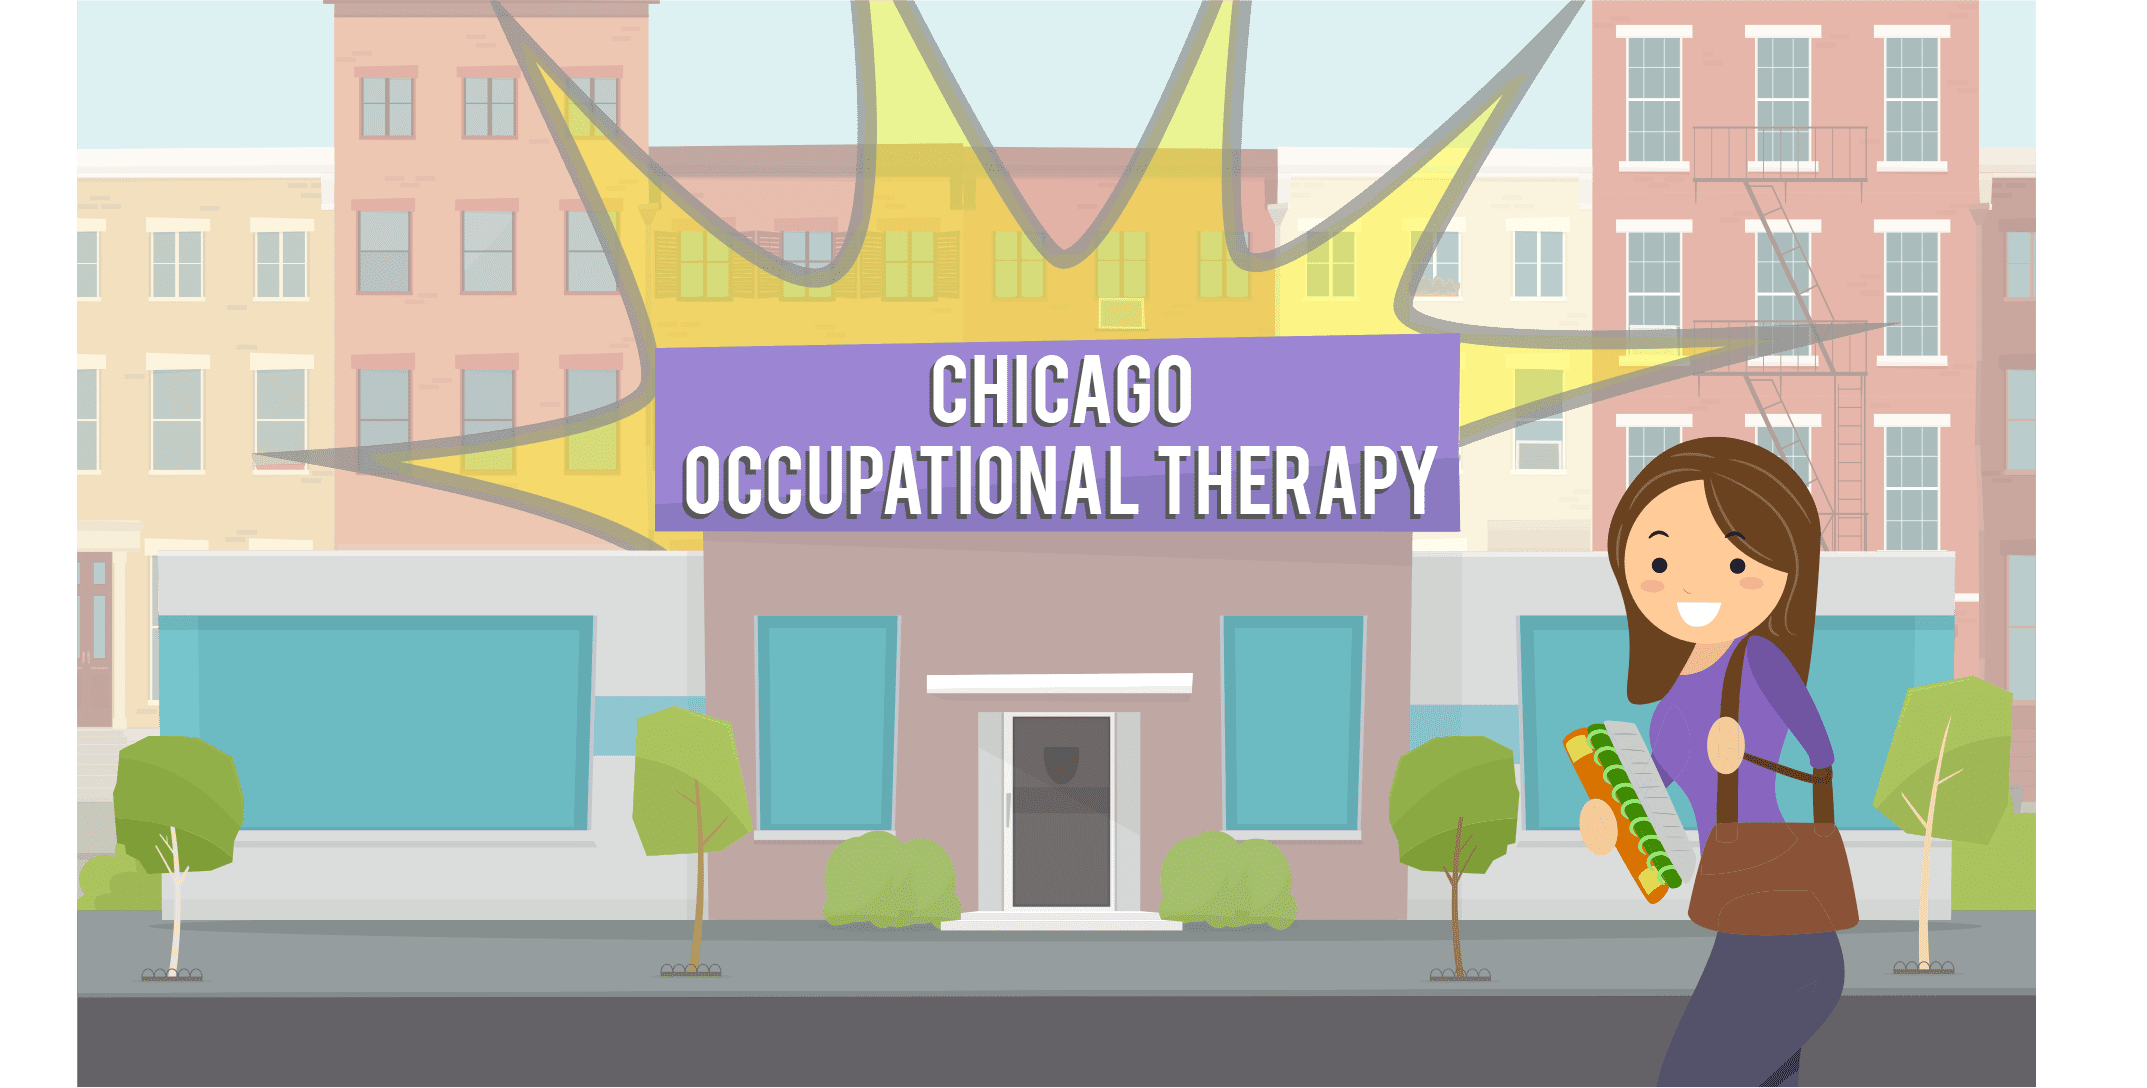 First Year Experience - Chicago Occupational Therapy